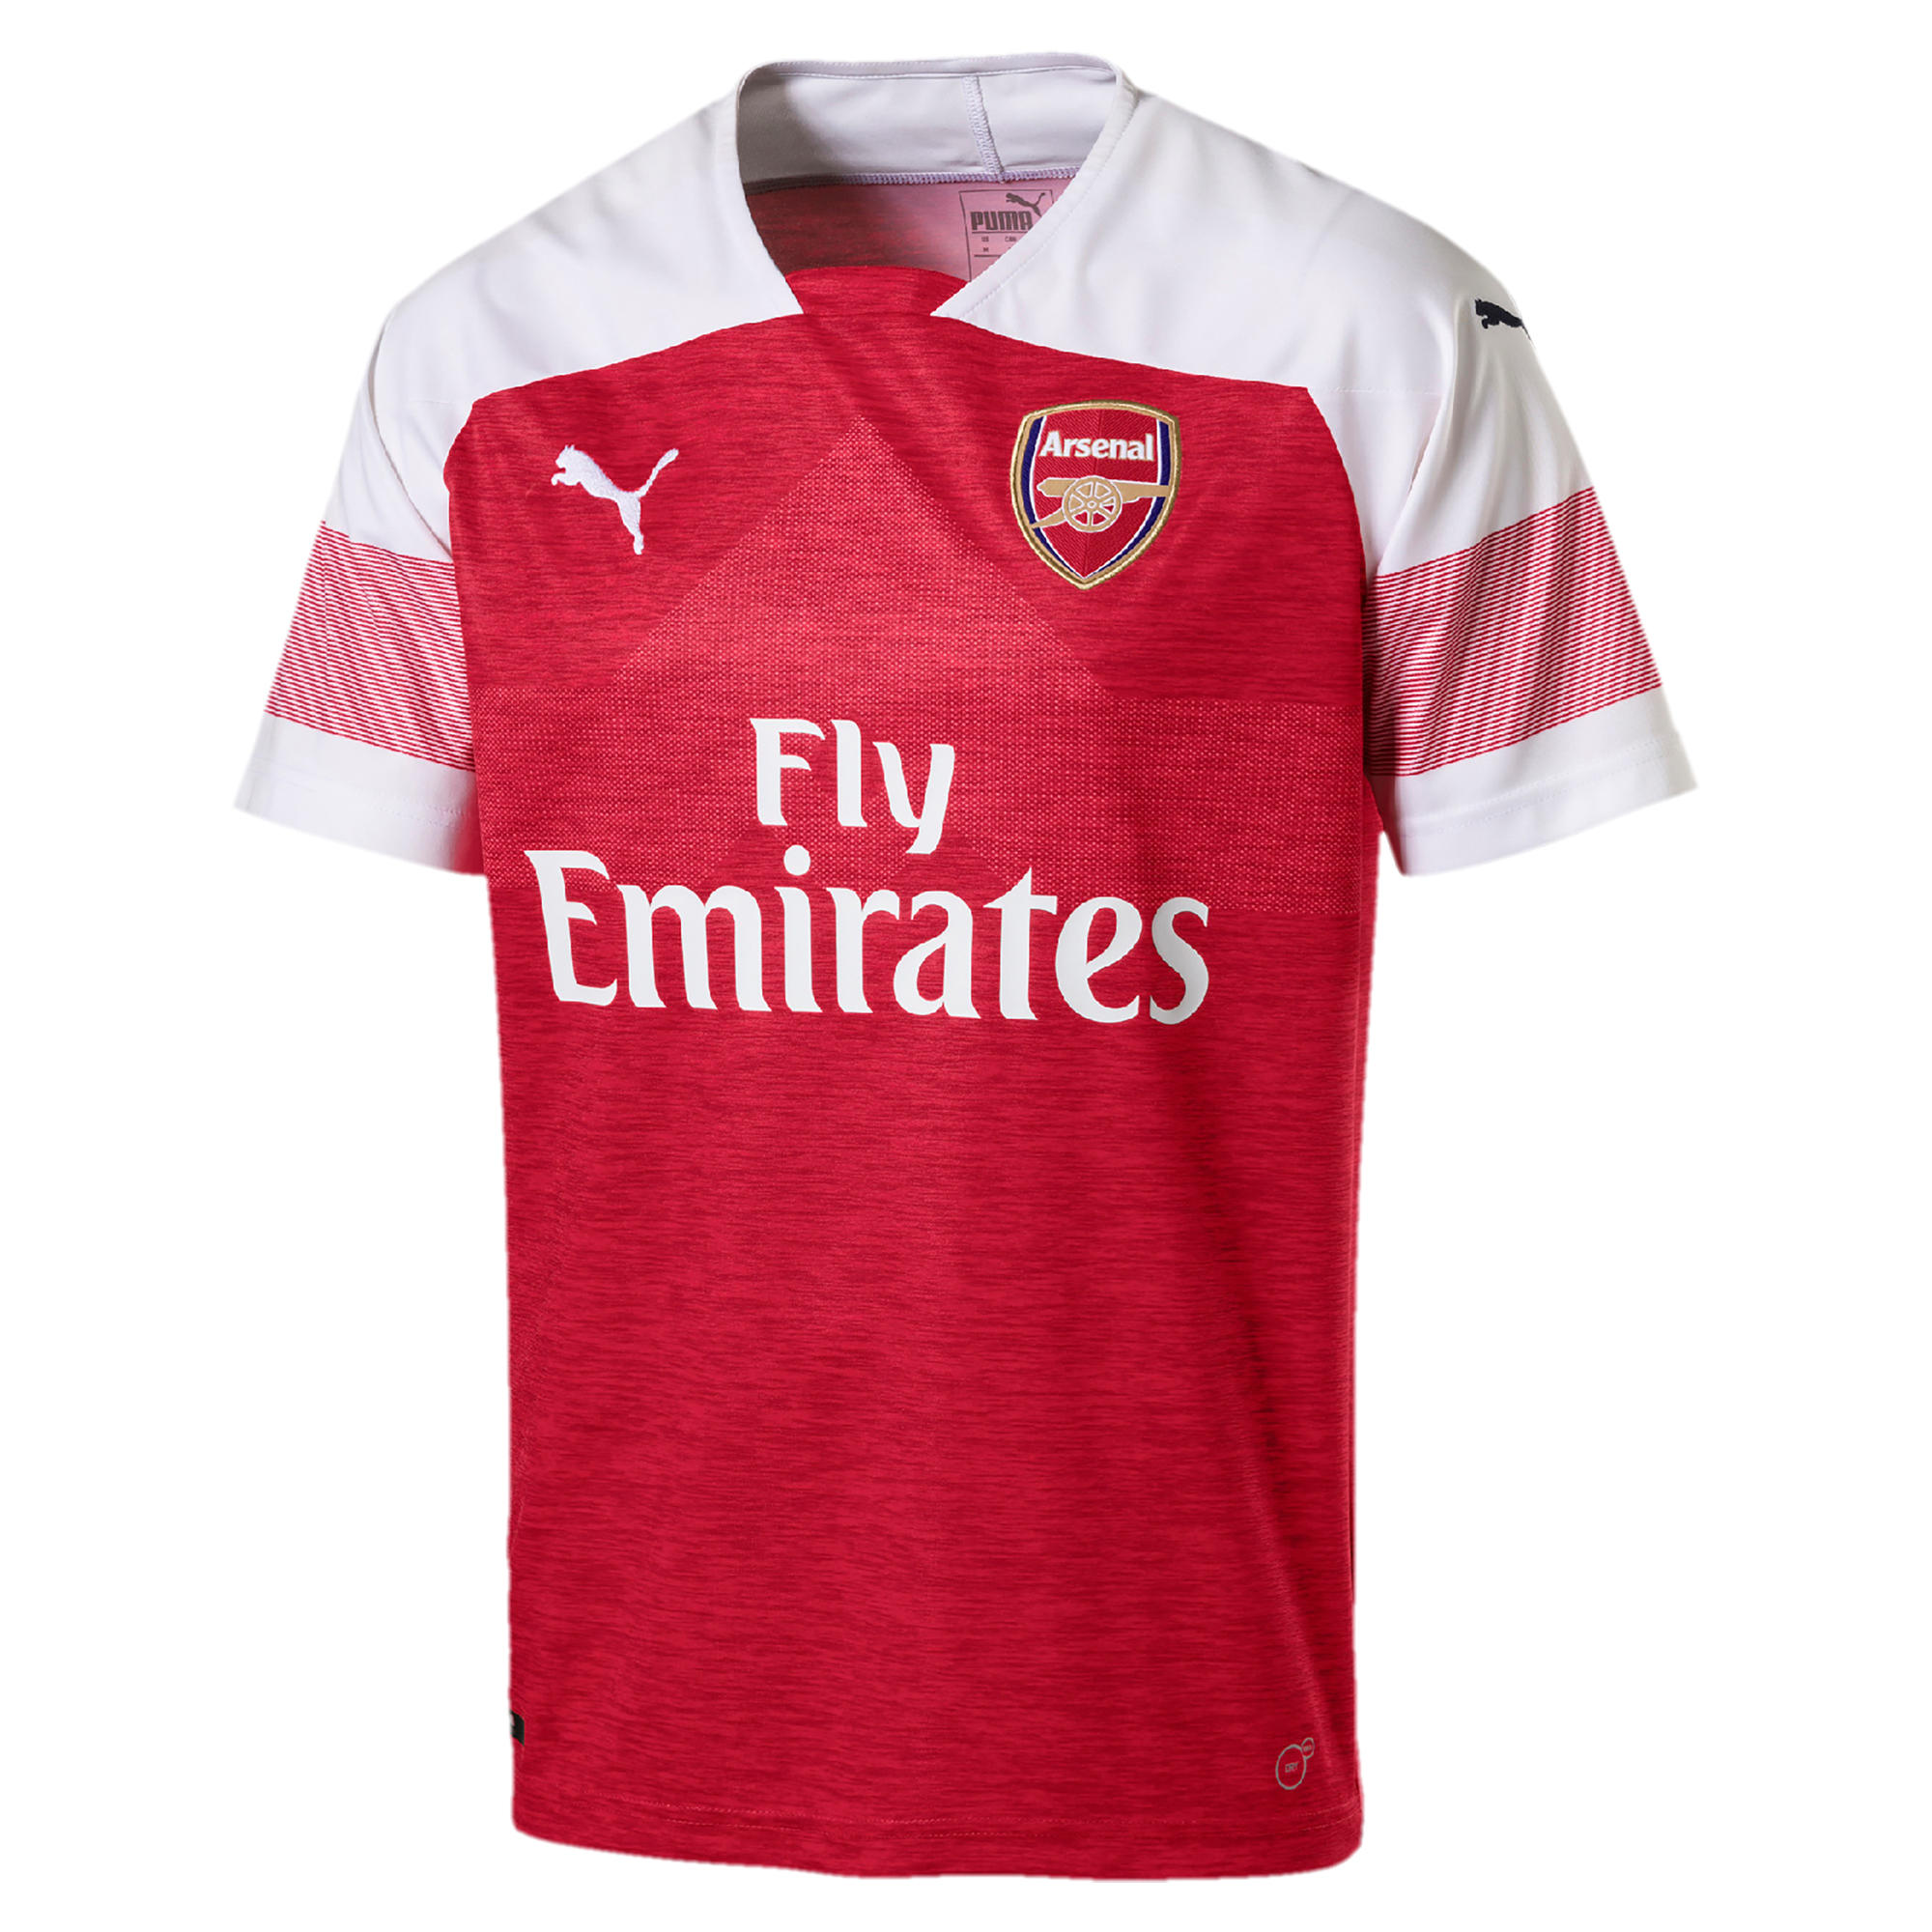 Arsenal 18/19 Adult Football Jersey - Red 1/2